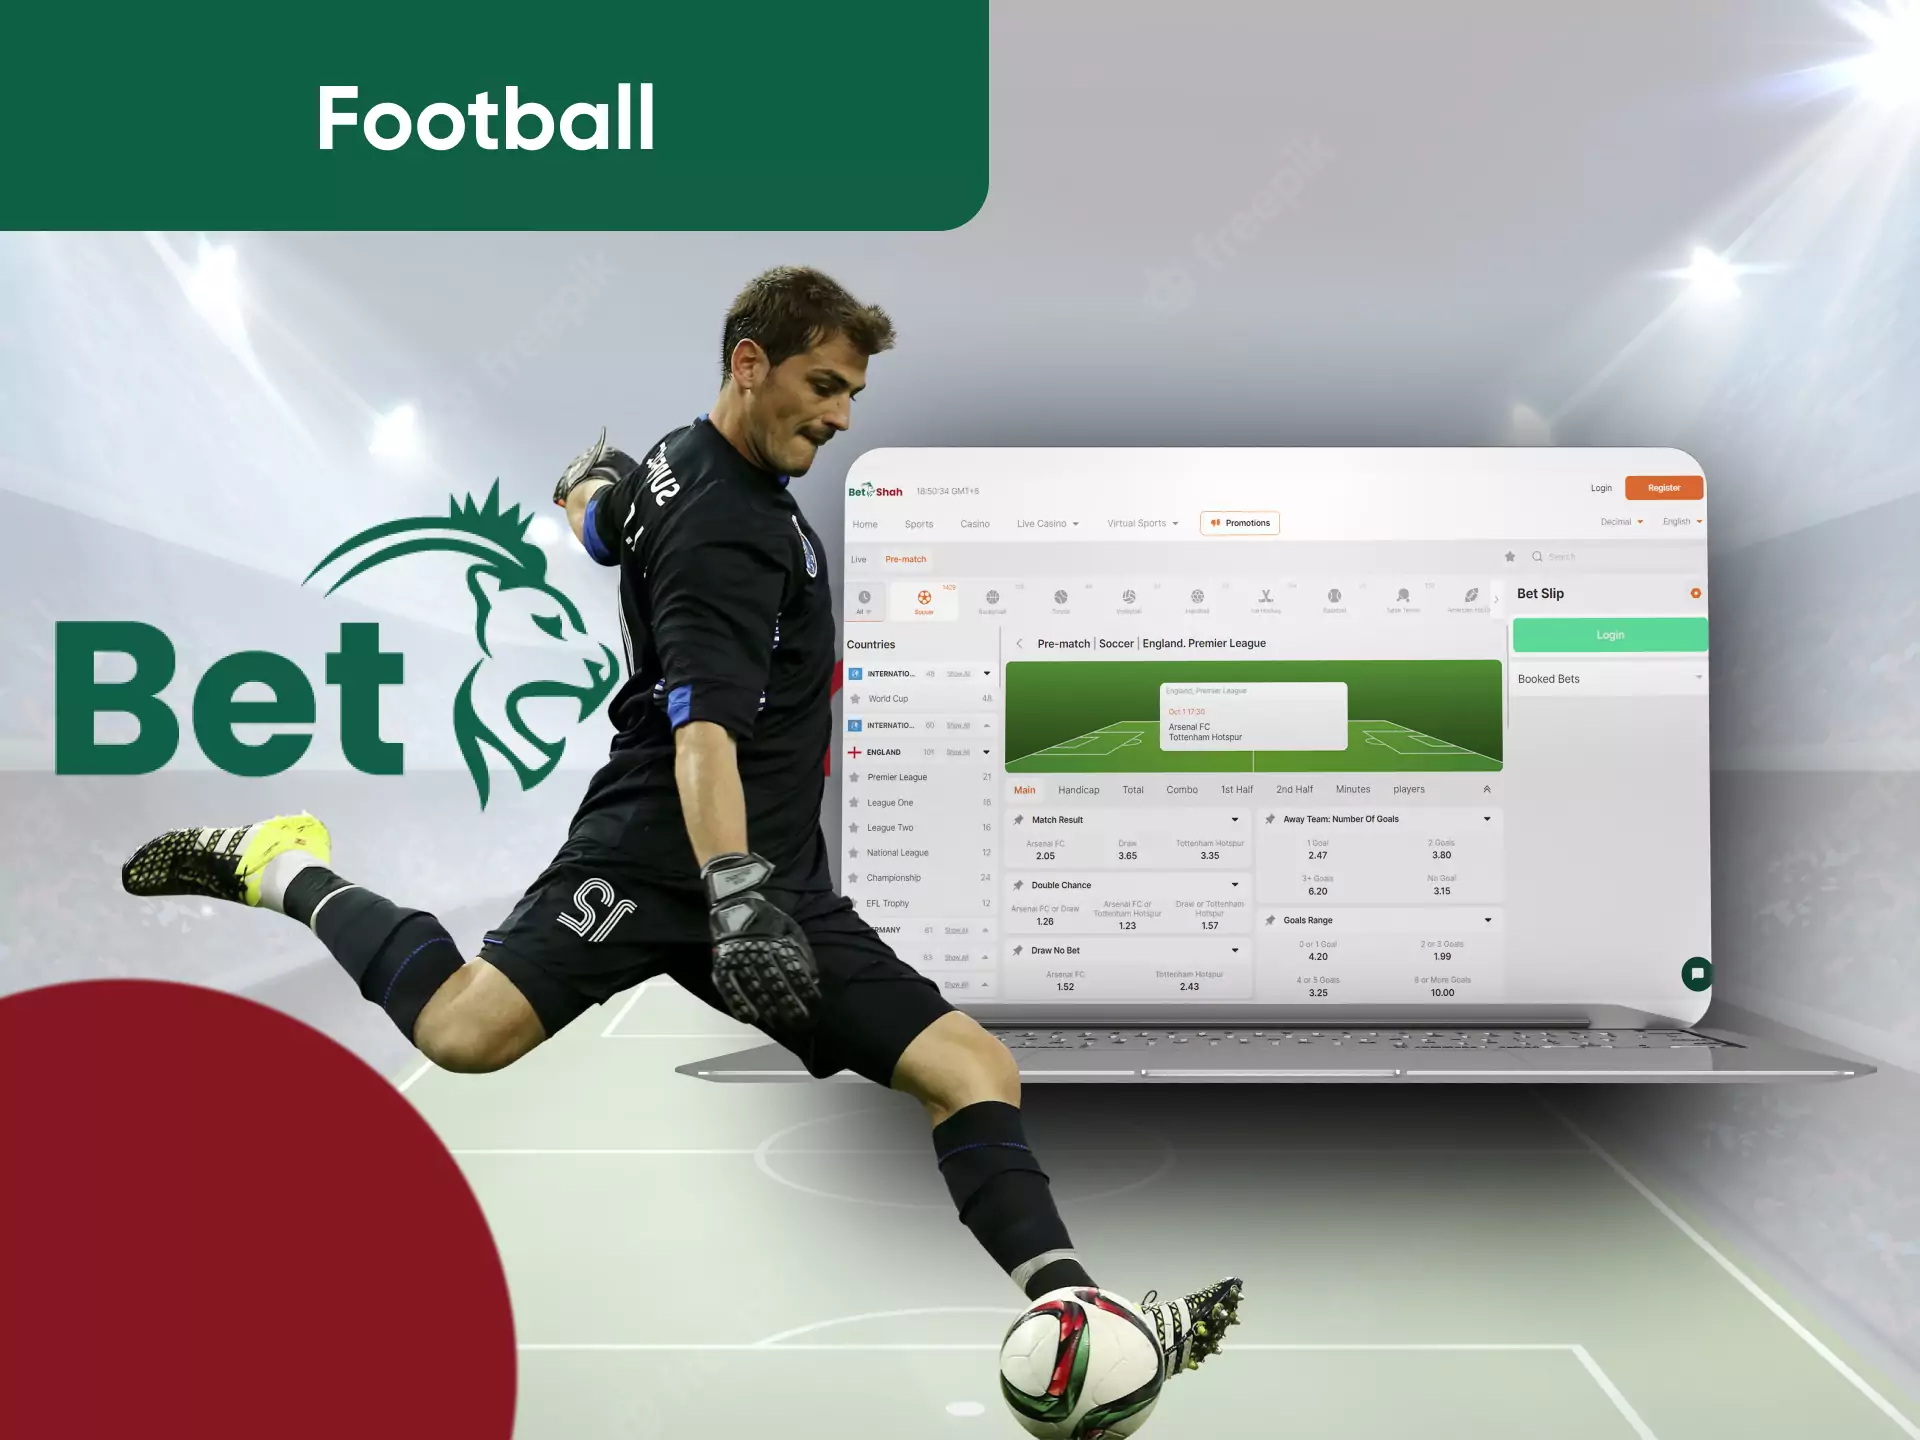 On Betshah, you can place bets on football matches.